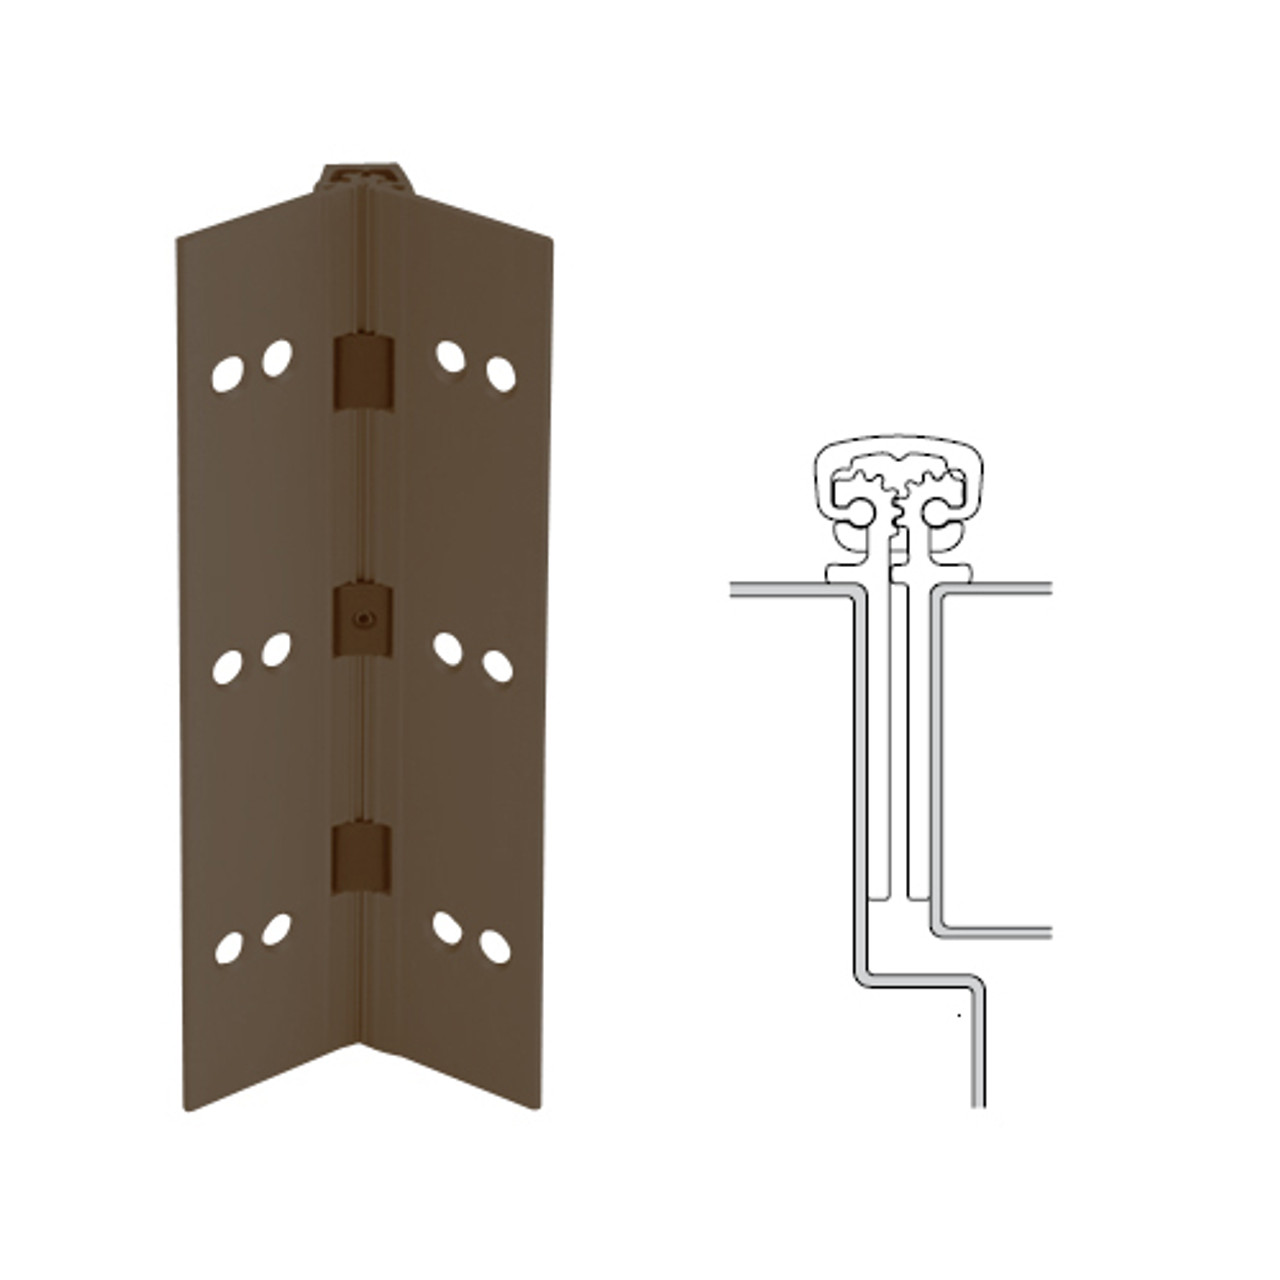 112XY-313AN-120-TEKWD IVES Full Mortise Continuous Geared Hinges with Wood Screws in Dark Bronze Anodized